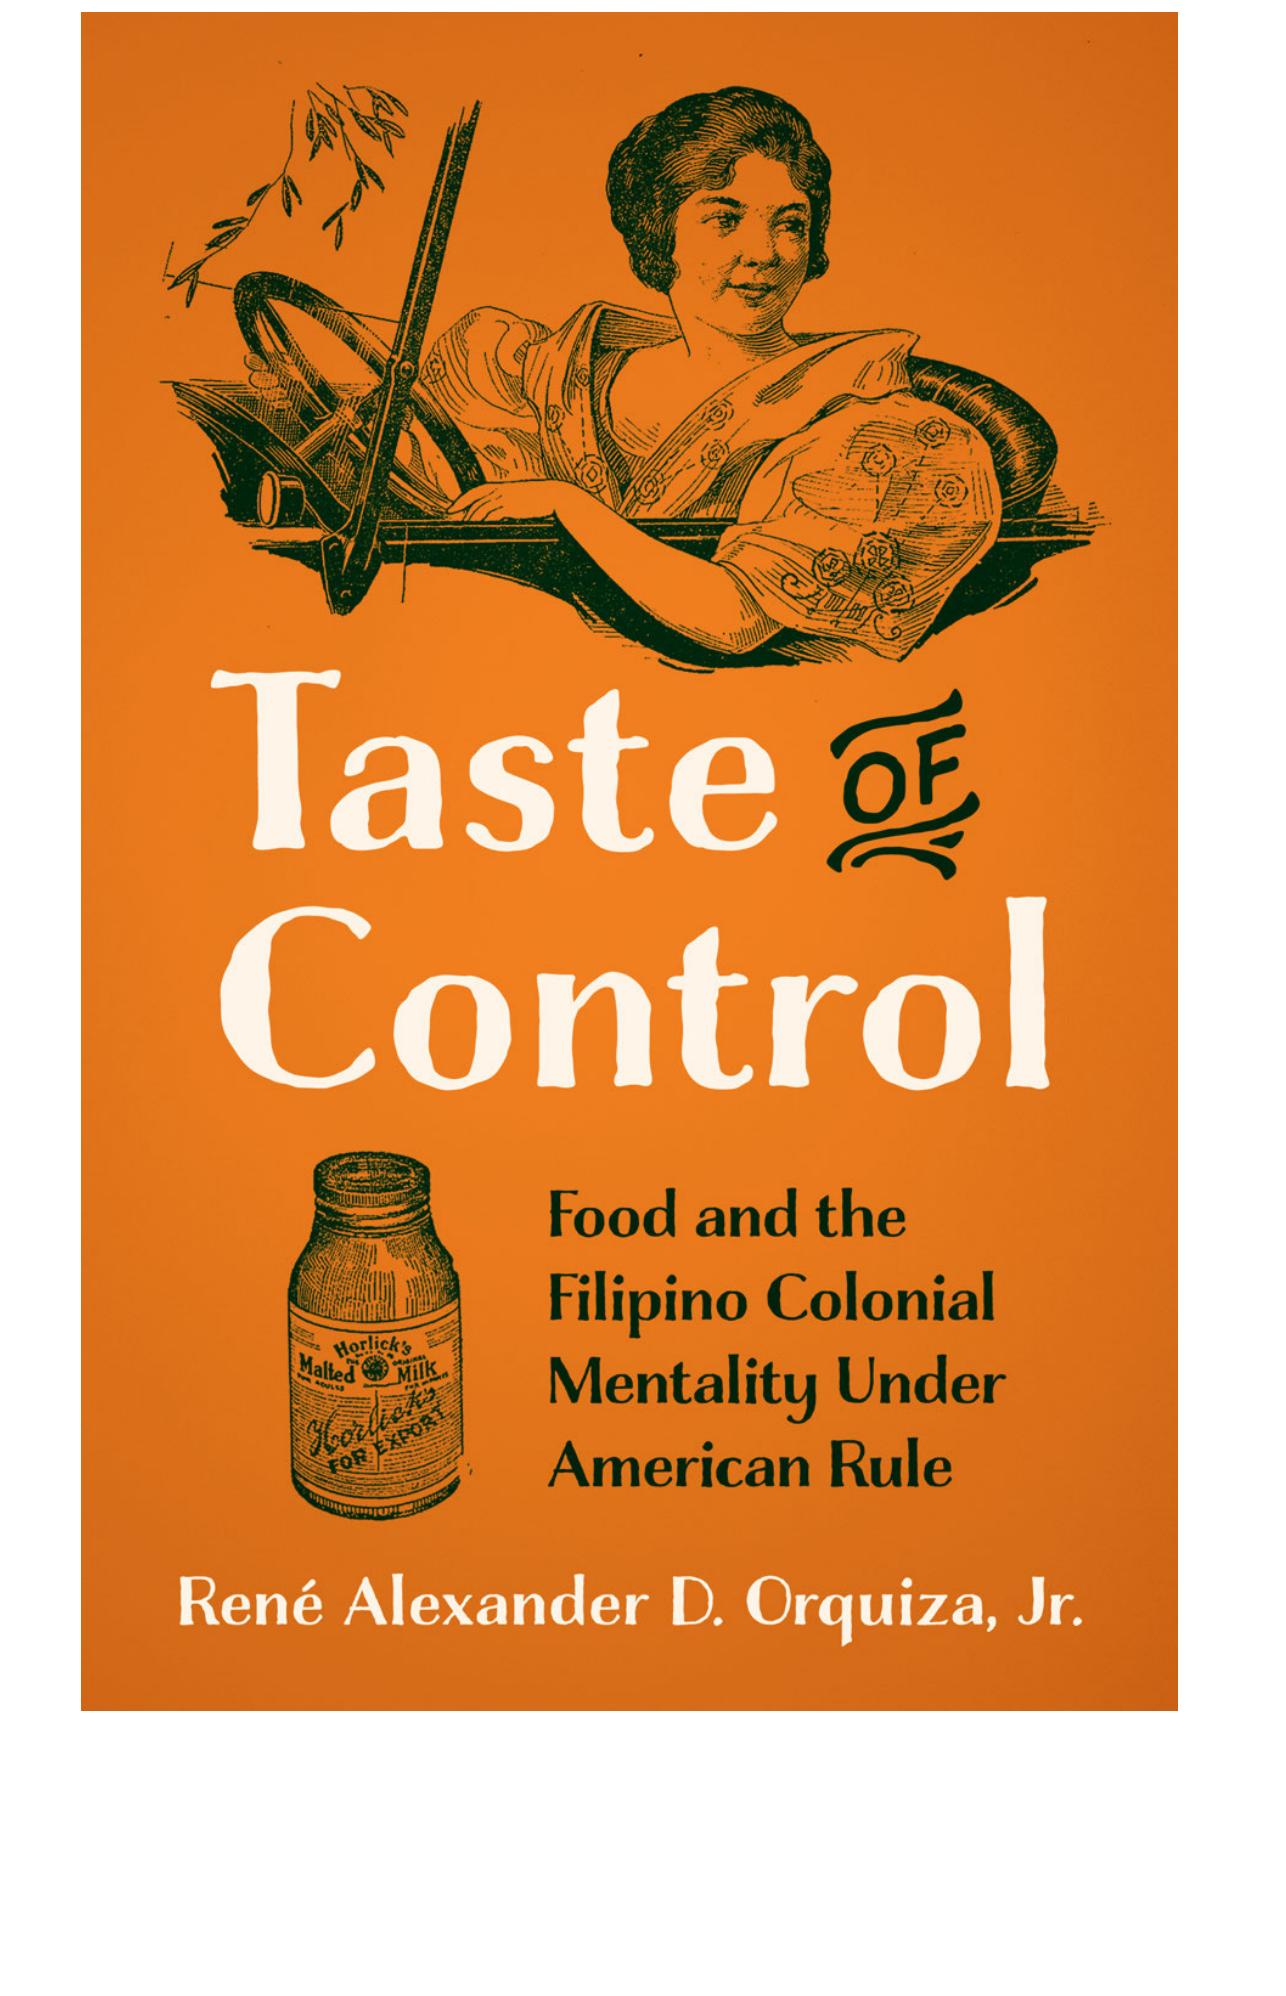 Taste of Control: Food and the Filipino Colonial Mentality under American Rule by René Alexander D. Orquiza